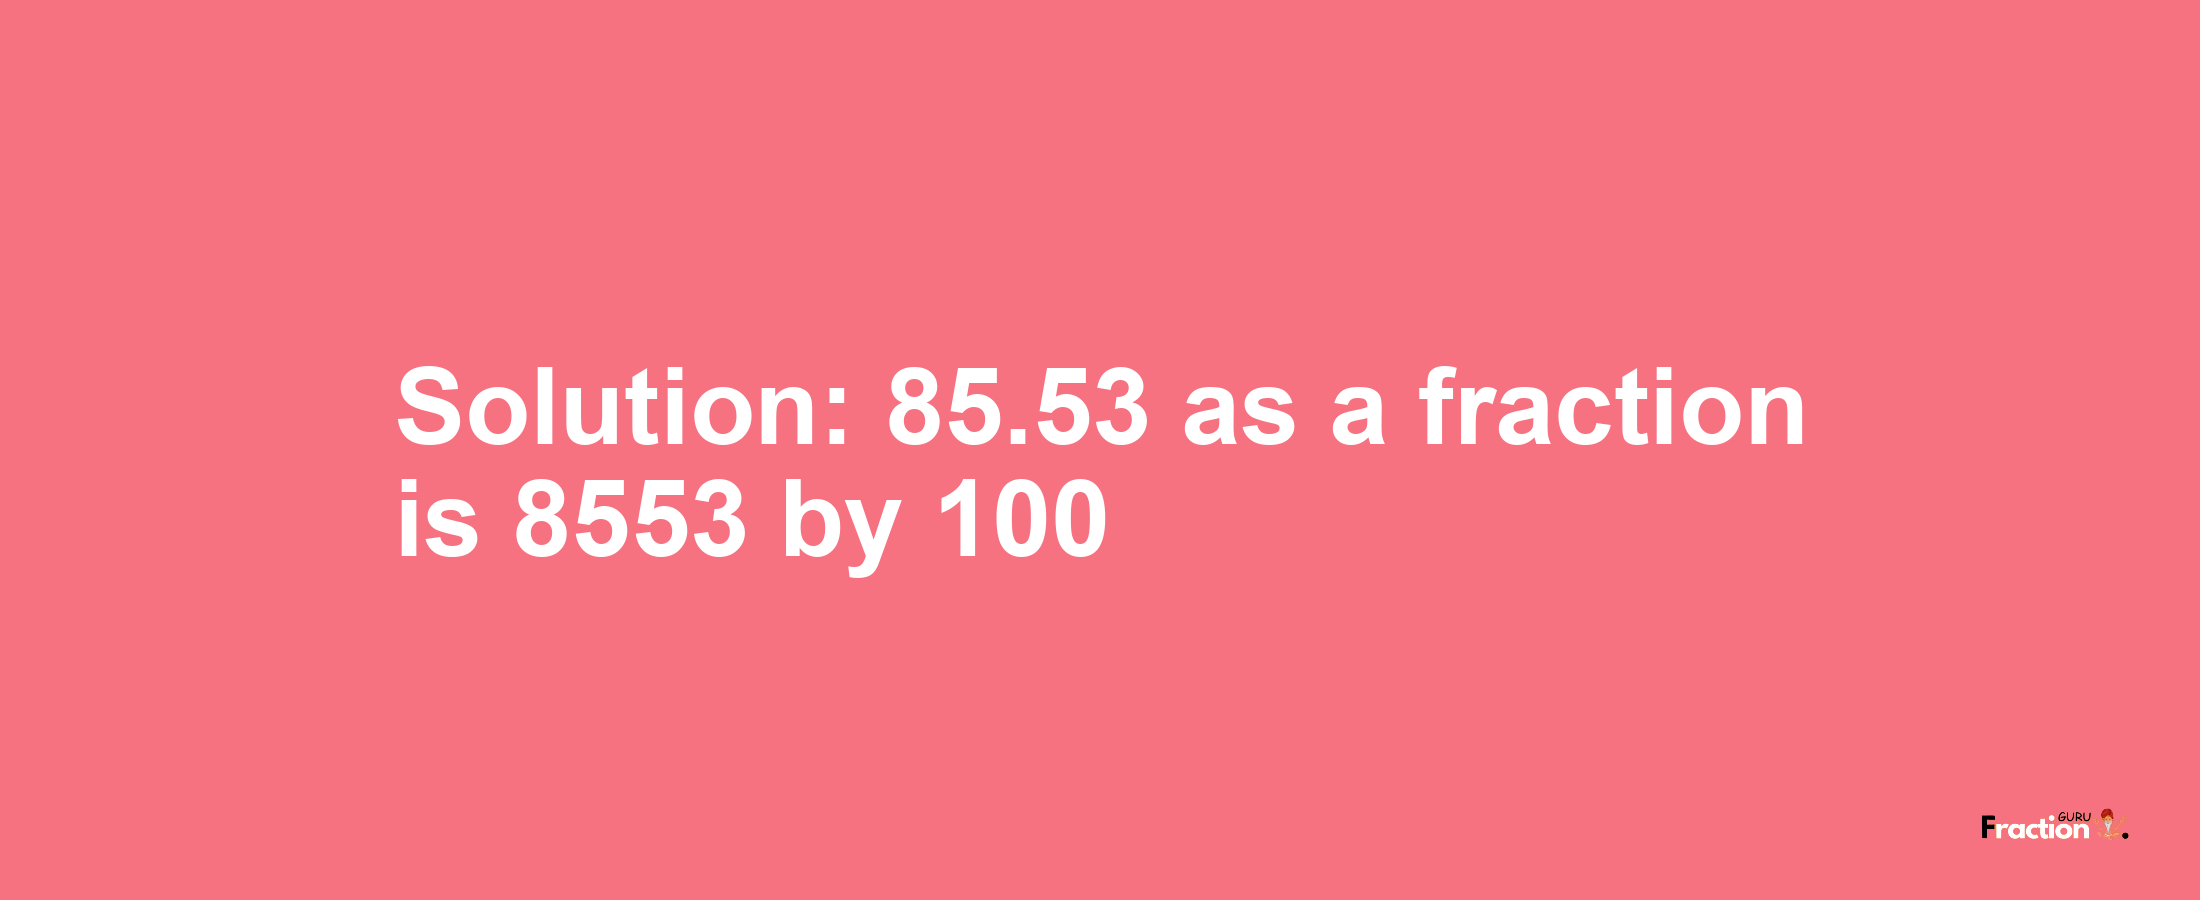 Solution:85.53 as a fraction is 8553/100